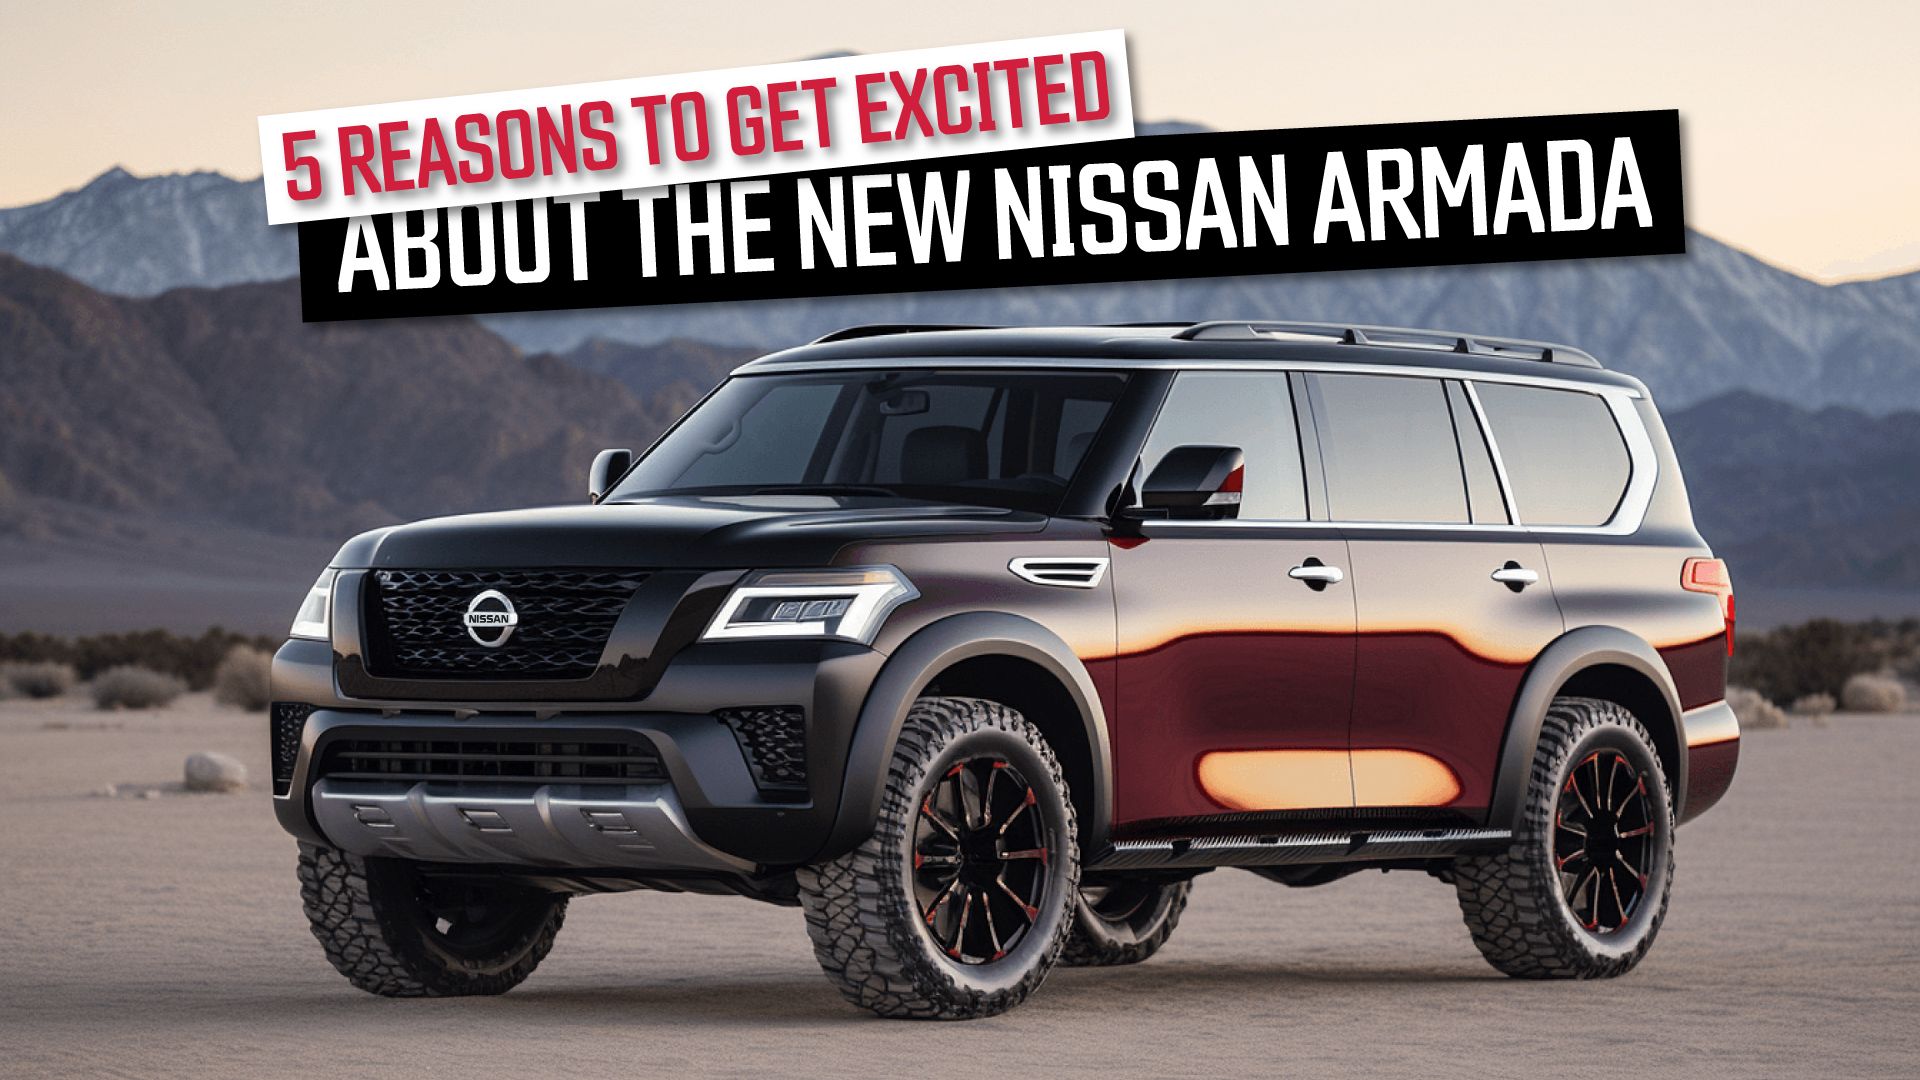 5-Reasons-To-Get-Excited-About-The-New-Nissan-Armada